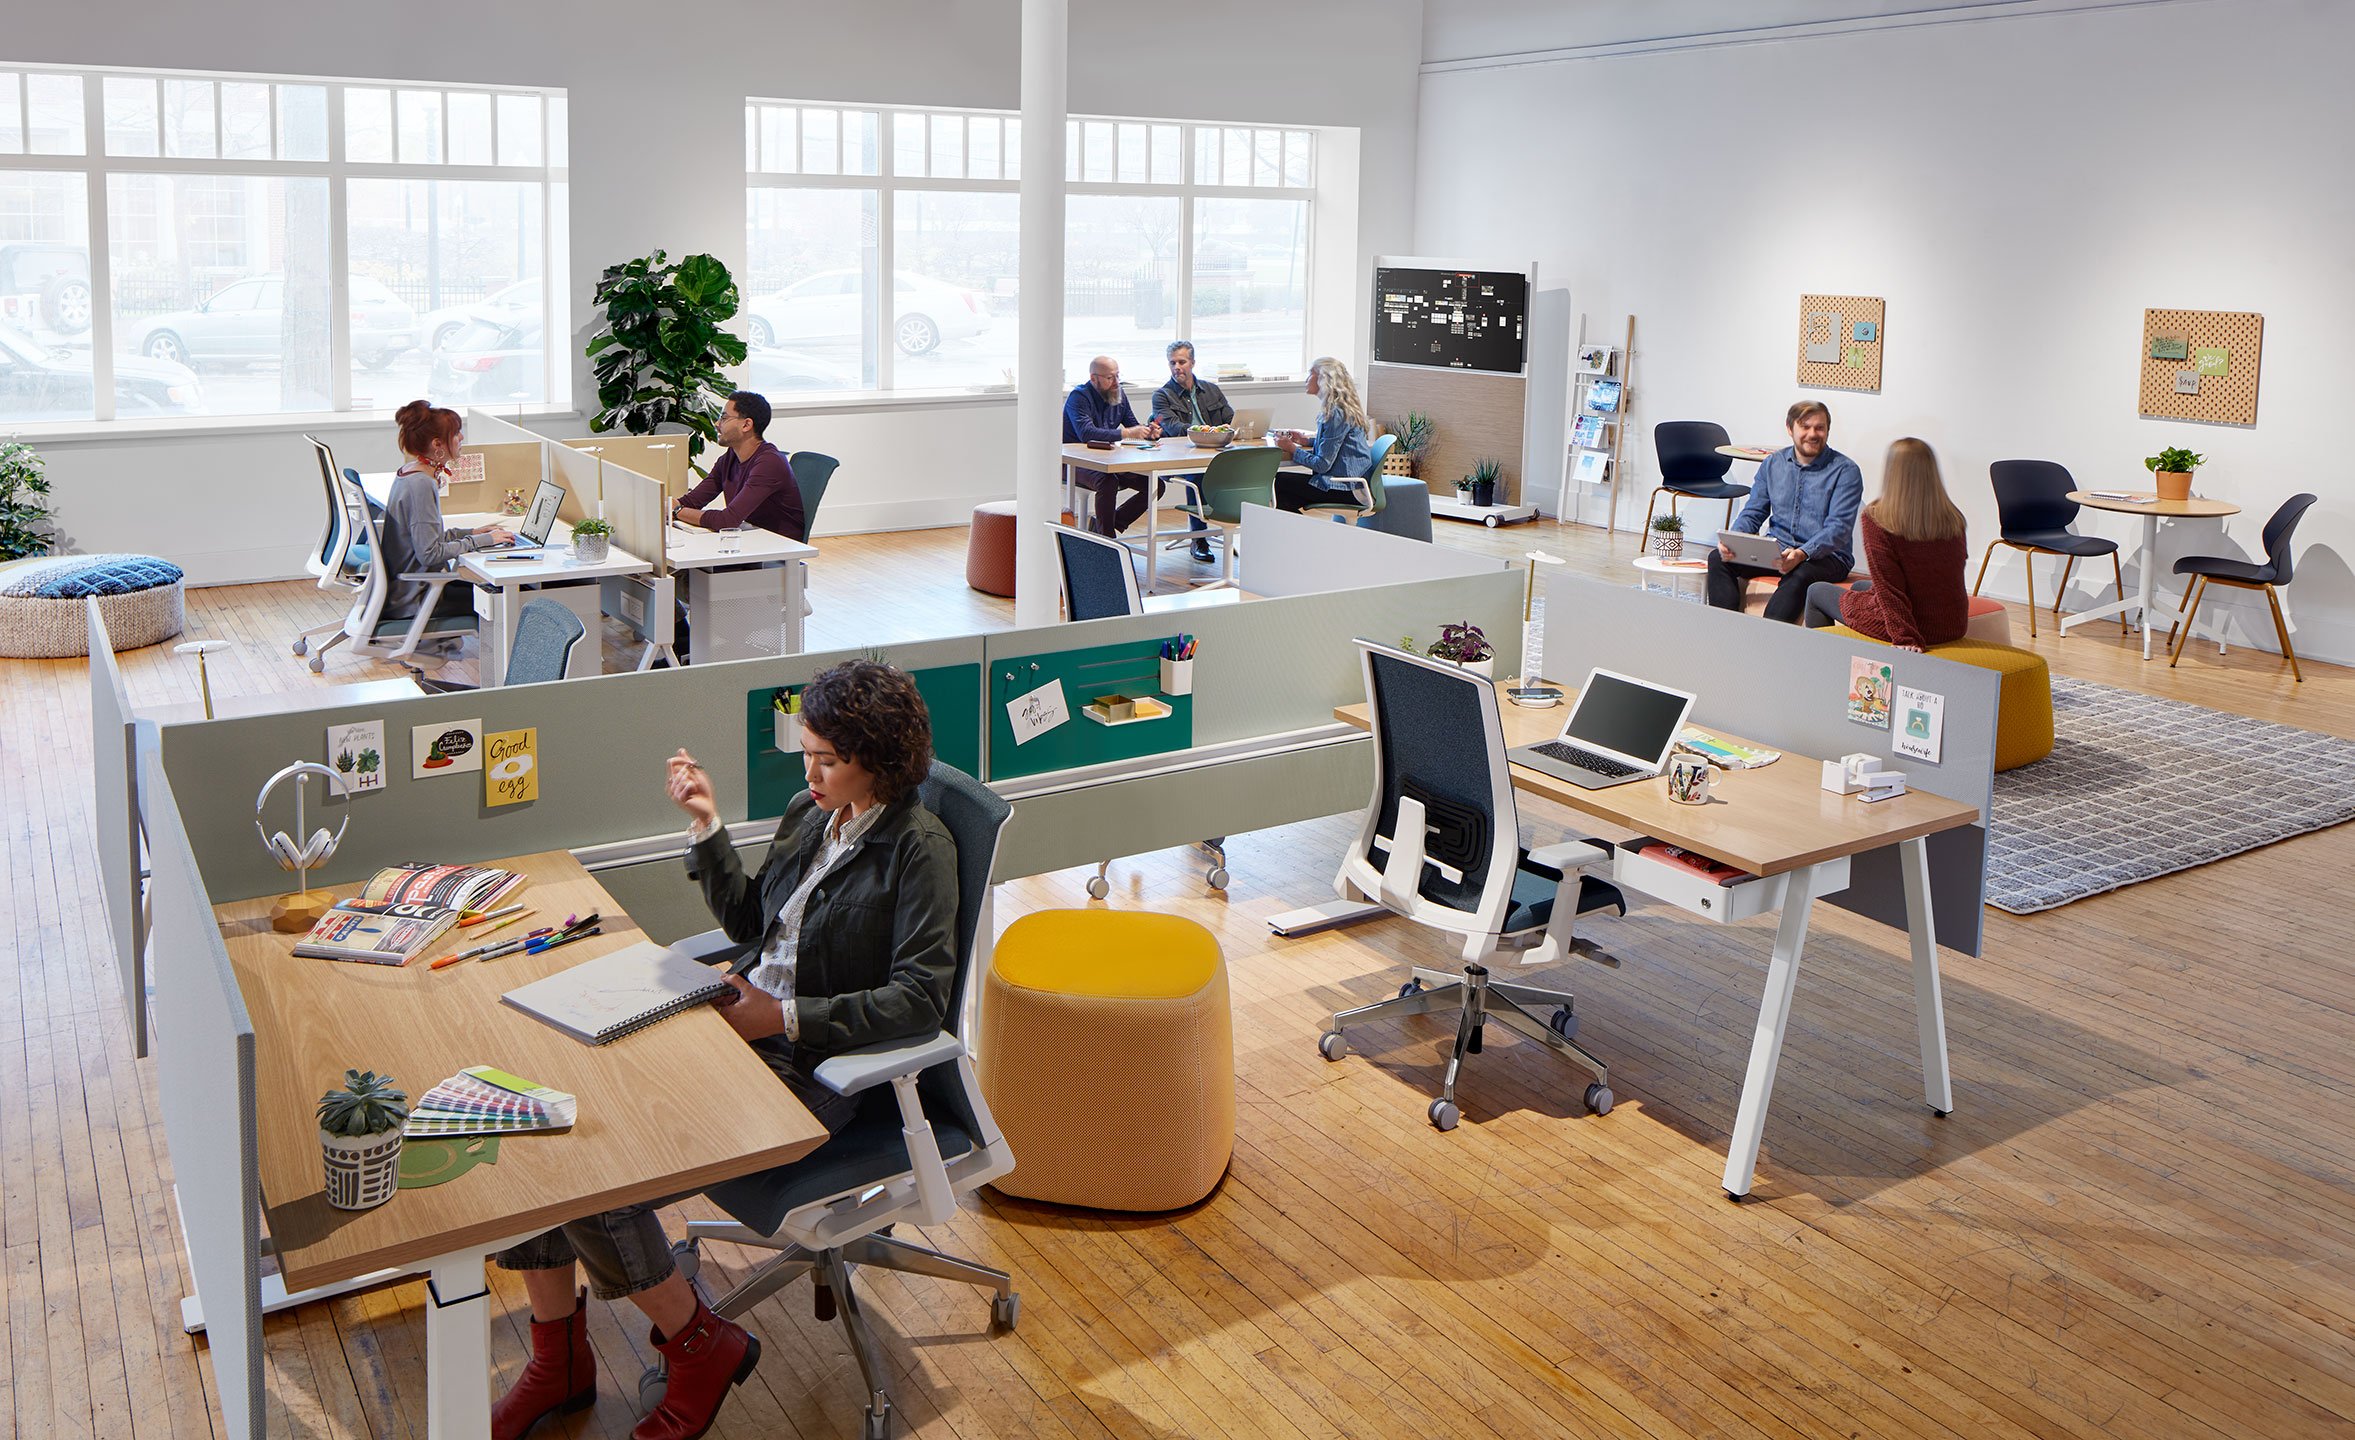 Haworth Compose Beam Workspace Divider in an open office space with employees working together and sitting at desks